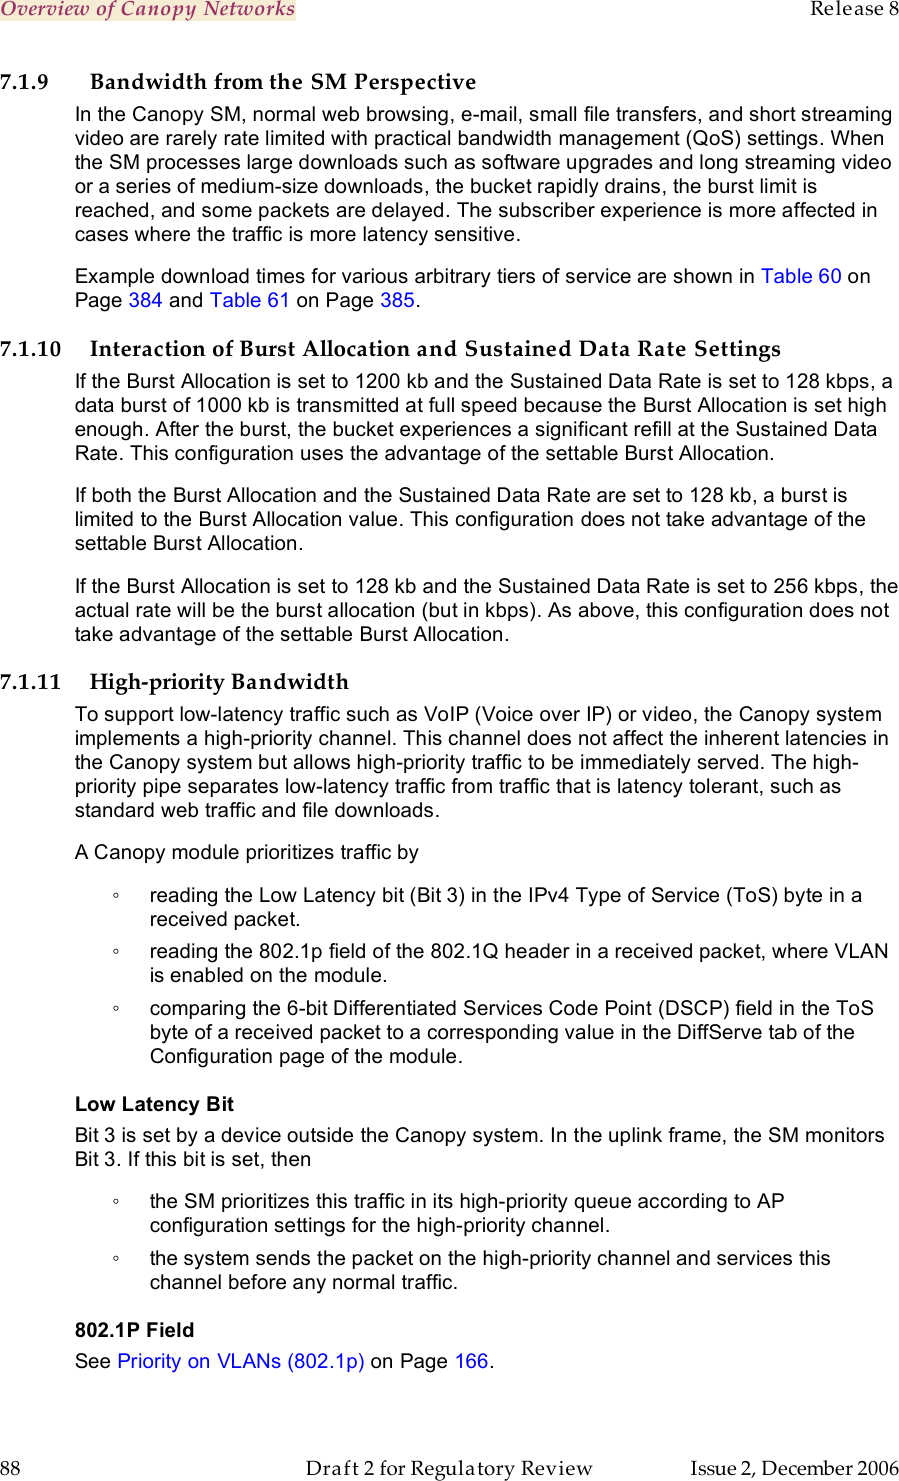 Overview of Canopy Networks    Release 8   88  Draft 2 for Regulatory Review  Issue 2, December 2006 7.1.9 Bandwidth from the SM Perspective In the Canopy SM, normal web browsing, e-mail, small file transfers, and short streaming video are rarely rate limited with practical bandwidth management (QoS) settings. When the SM processes large downloads such as software upgrades and long streaming video or a series of medium-size downloads, the bucket rapidly drains, the burst limit is reached, and some packets are delayed. The subscriber experience is more affected in cases where the traffic is more latency sensitive. Example download times for various arbitrary tiers of service are shown in Table 60 on Page 384 and Table 61 on Page 385.  7.1.10 Interaction of Burst Allocation and Sustained Data Rate Settings If the Burst Allocation is set to 1200 kb and the Sustained Data Rate is set to 128 kbps, a data burst of 1000 kb is transmitted at full speed because the Burst Allocation is set high enough. After the burst, the bucket experiences a significant refill at the Sustained Data Rate. This configuration uses the advantage of the settable Burst Allocation. If both the Burst Allocation and the Sustained Data Rate are set to 128 kb, a burst is limited to the Burst Allocation value. This configuration does not take advantage of the settable Burst Allocation. If the Burst Allocation is set to 128 kb and the Sustained Data Rate is set to 256 kbps, the actual rate will be the burst allocation (but in kbps). As above, this configuration does not take advantage of the settable Burst Allocation. 7.1.11 High-priority Bandwidth To support low-latency traffic such as VoIP (Voice over IP) or video, the Canopy system implements a high-priority channel. This channel does not affect the inherent latencies in the Canopy system but allows high-priority traffic to be immediately served. The high-priority pipe separates low-latency traffic from traffic that is latency tolerant, such as standard web traffic and file downloads.  A Canopy module prioritizes traffic by  ◦  reading the Low Latency bit (Bit 3) in the IPv4 Type of Service (ToS) byte in a received packet.  ◦  reading the 802.1p field of the 802.1Q header in a received packet, where VLAN is enabled on the module. ◦  comparing the 6-bit Differentiated Services Code Point (DSCP) field in the ToS byte of a received packet to a corresponding value in the DiffServe tab of the Configuration page of the module. Low Latency Bit Bit 3 is set by a device outside the Canopy system. In the uplink frame, the SM monitors Bit 3. If this bit is set, then  ◦  the SM prioritizes this traffic in its high-priority queue according to AP configuration settings for the high-priority channel. ◦  the system sends the packet on the high-priority channel and services this channel before any normal traffic. 802.1P Field See Priority on VLANs (802.1p) on Page 166. 